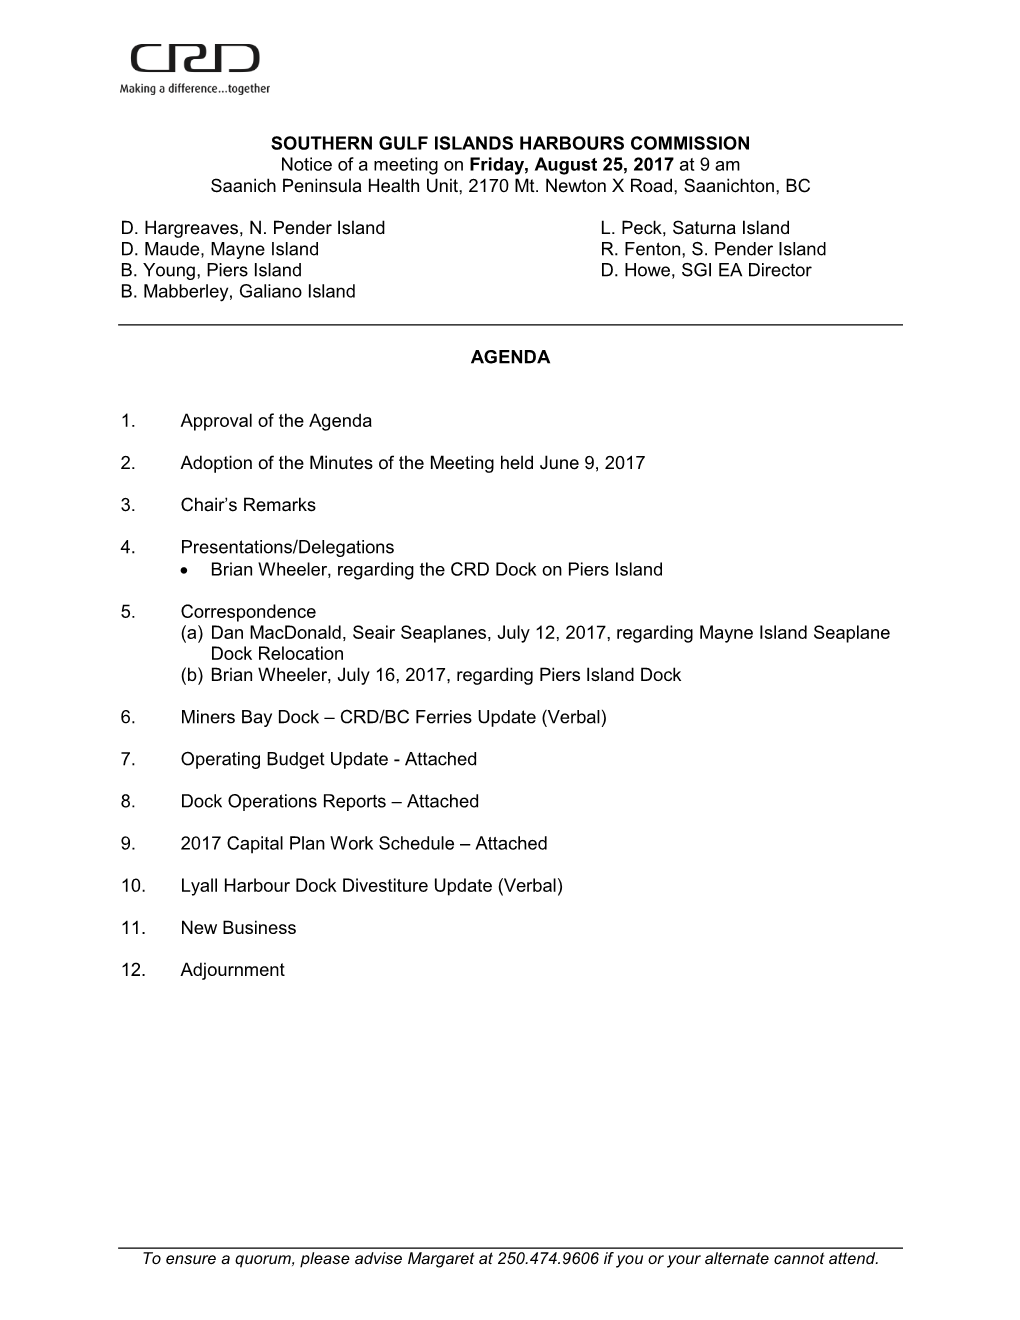 SOUTHERN GULF ISLANDS HARBOURS COMMISSION Notice of a Meeting on Friday, August 25, 2017 at 9 Am Saanich Peninsula Health Unit, 2170 Mt